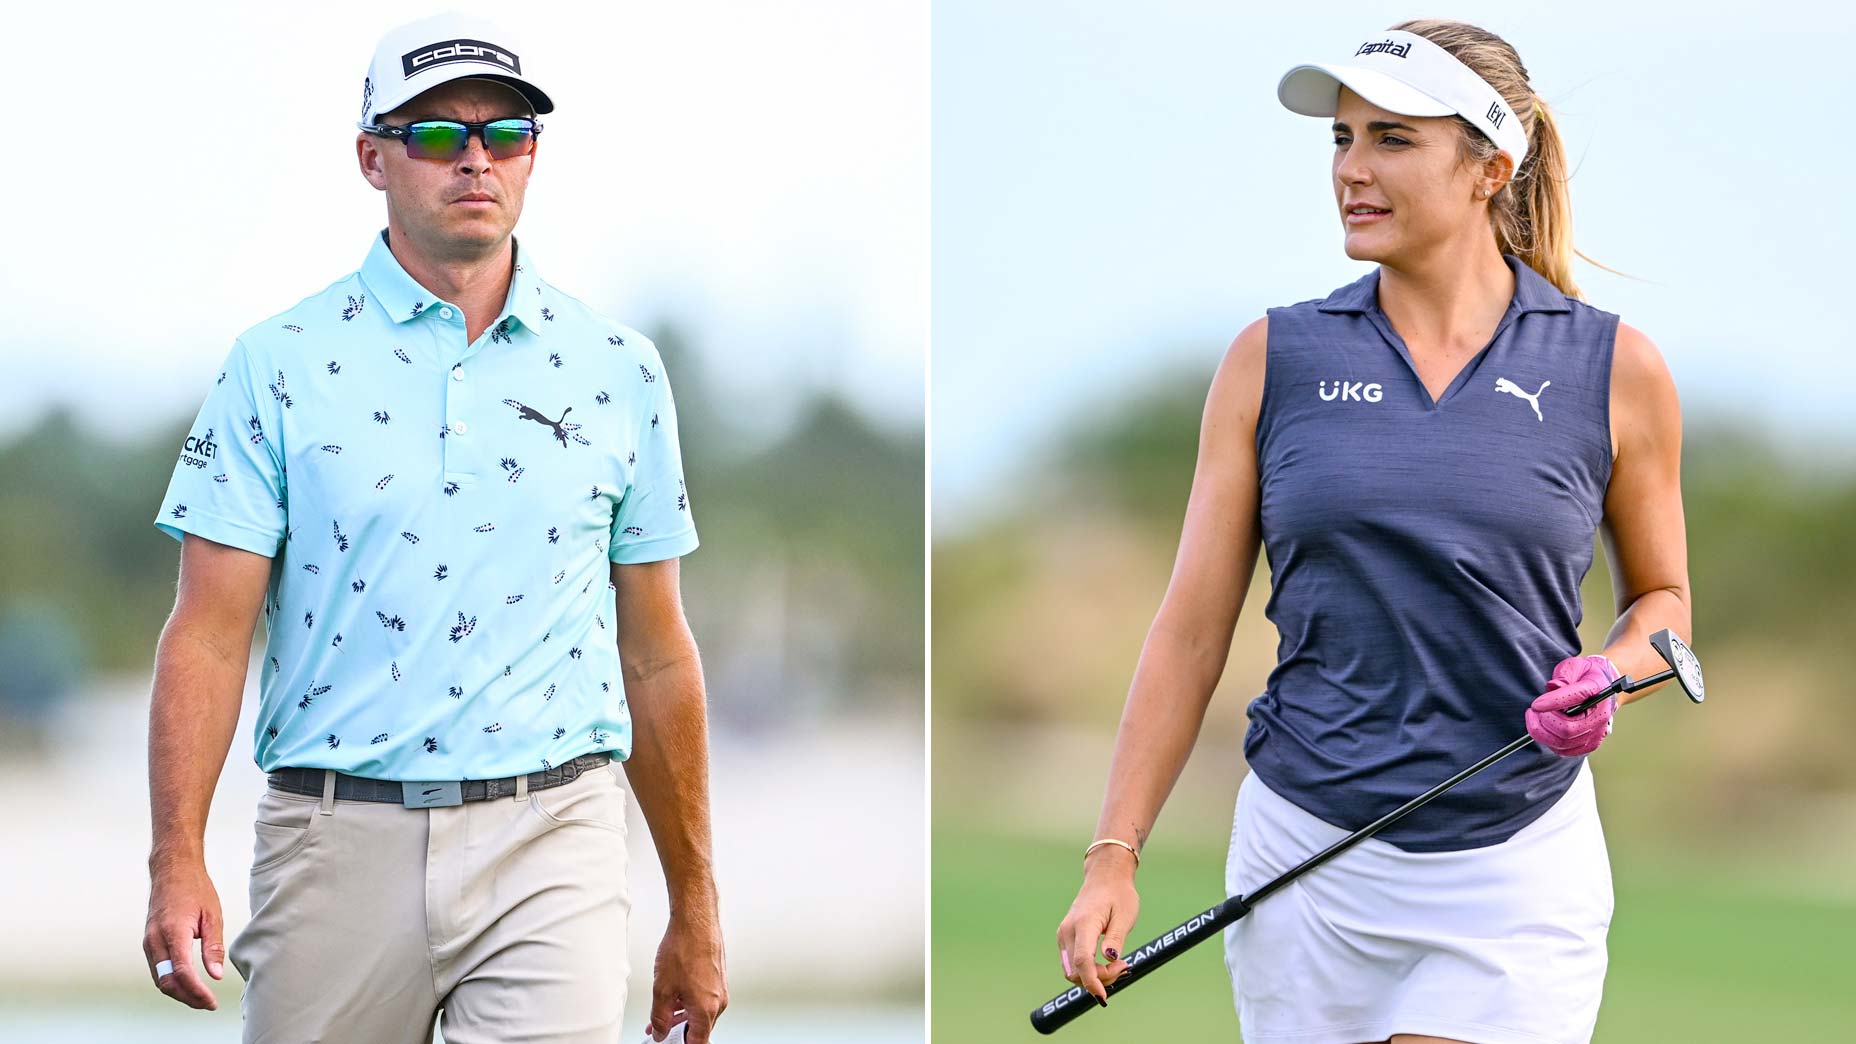 PGA Tour pro Rickie Fowler, left, stands during golf event and LPGA pro Lexi Thompson, right, at tournament